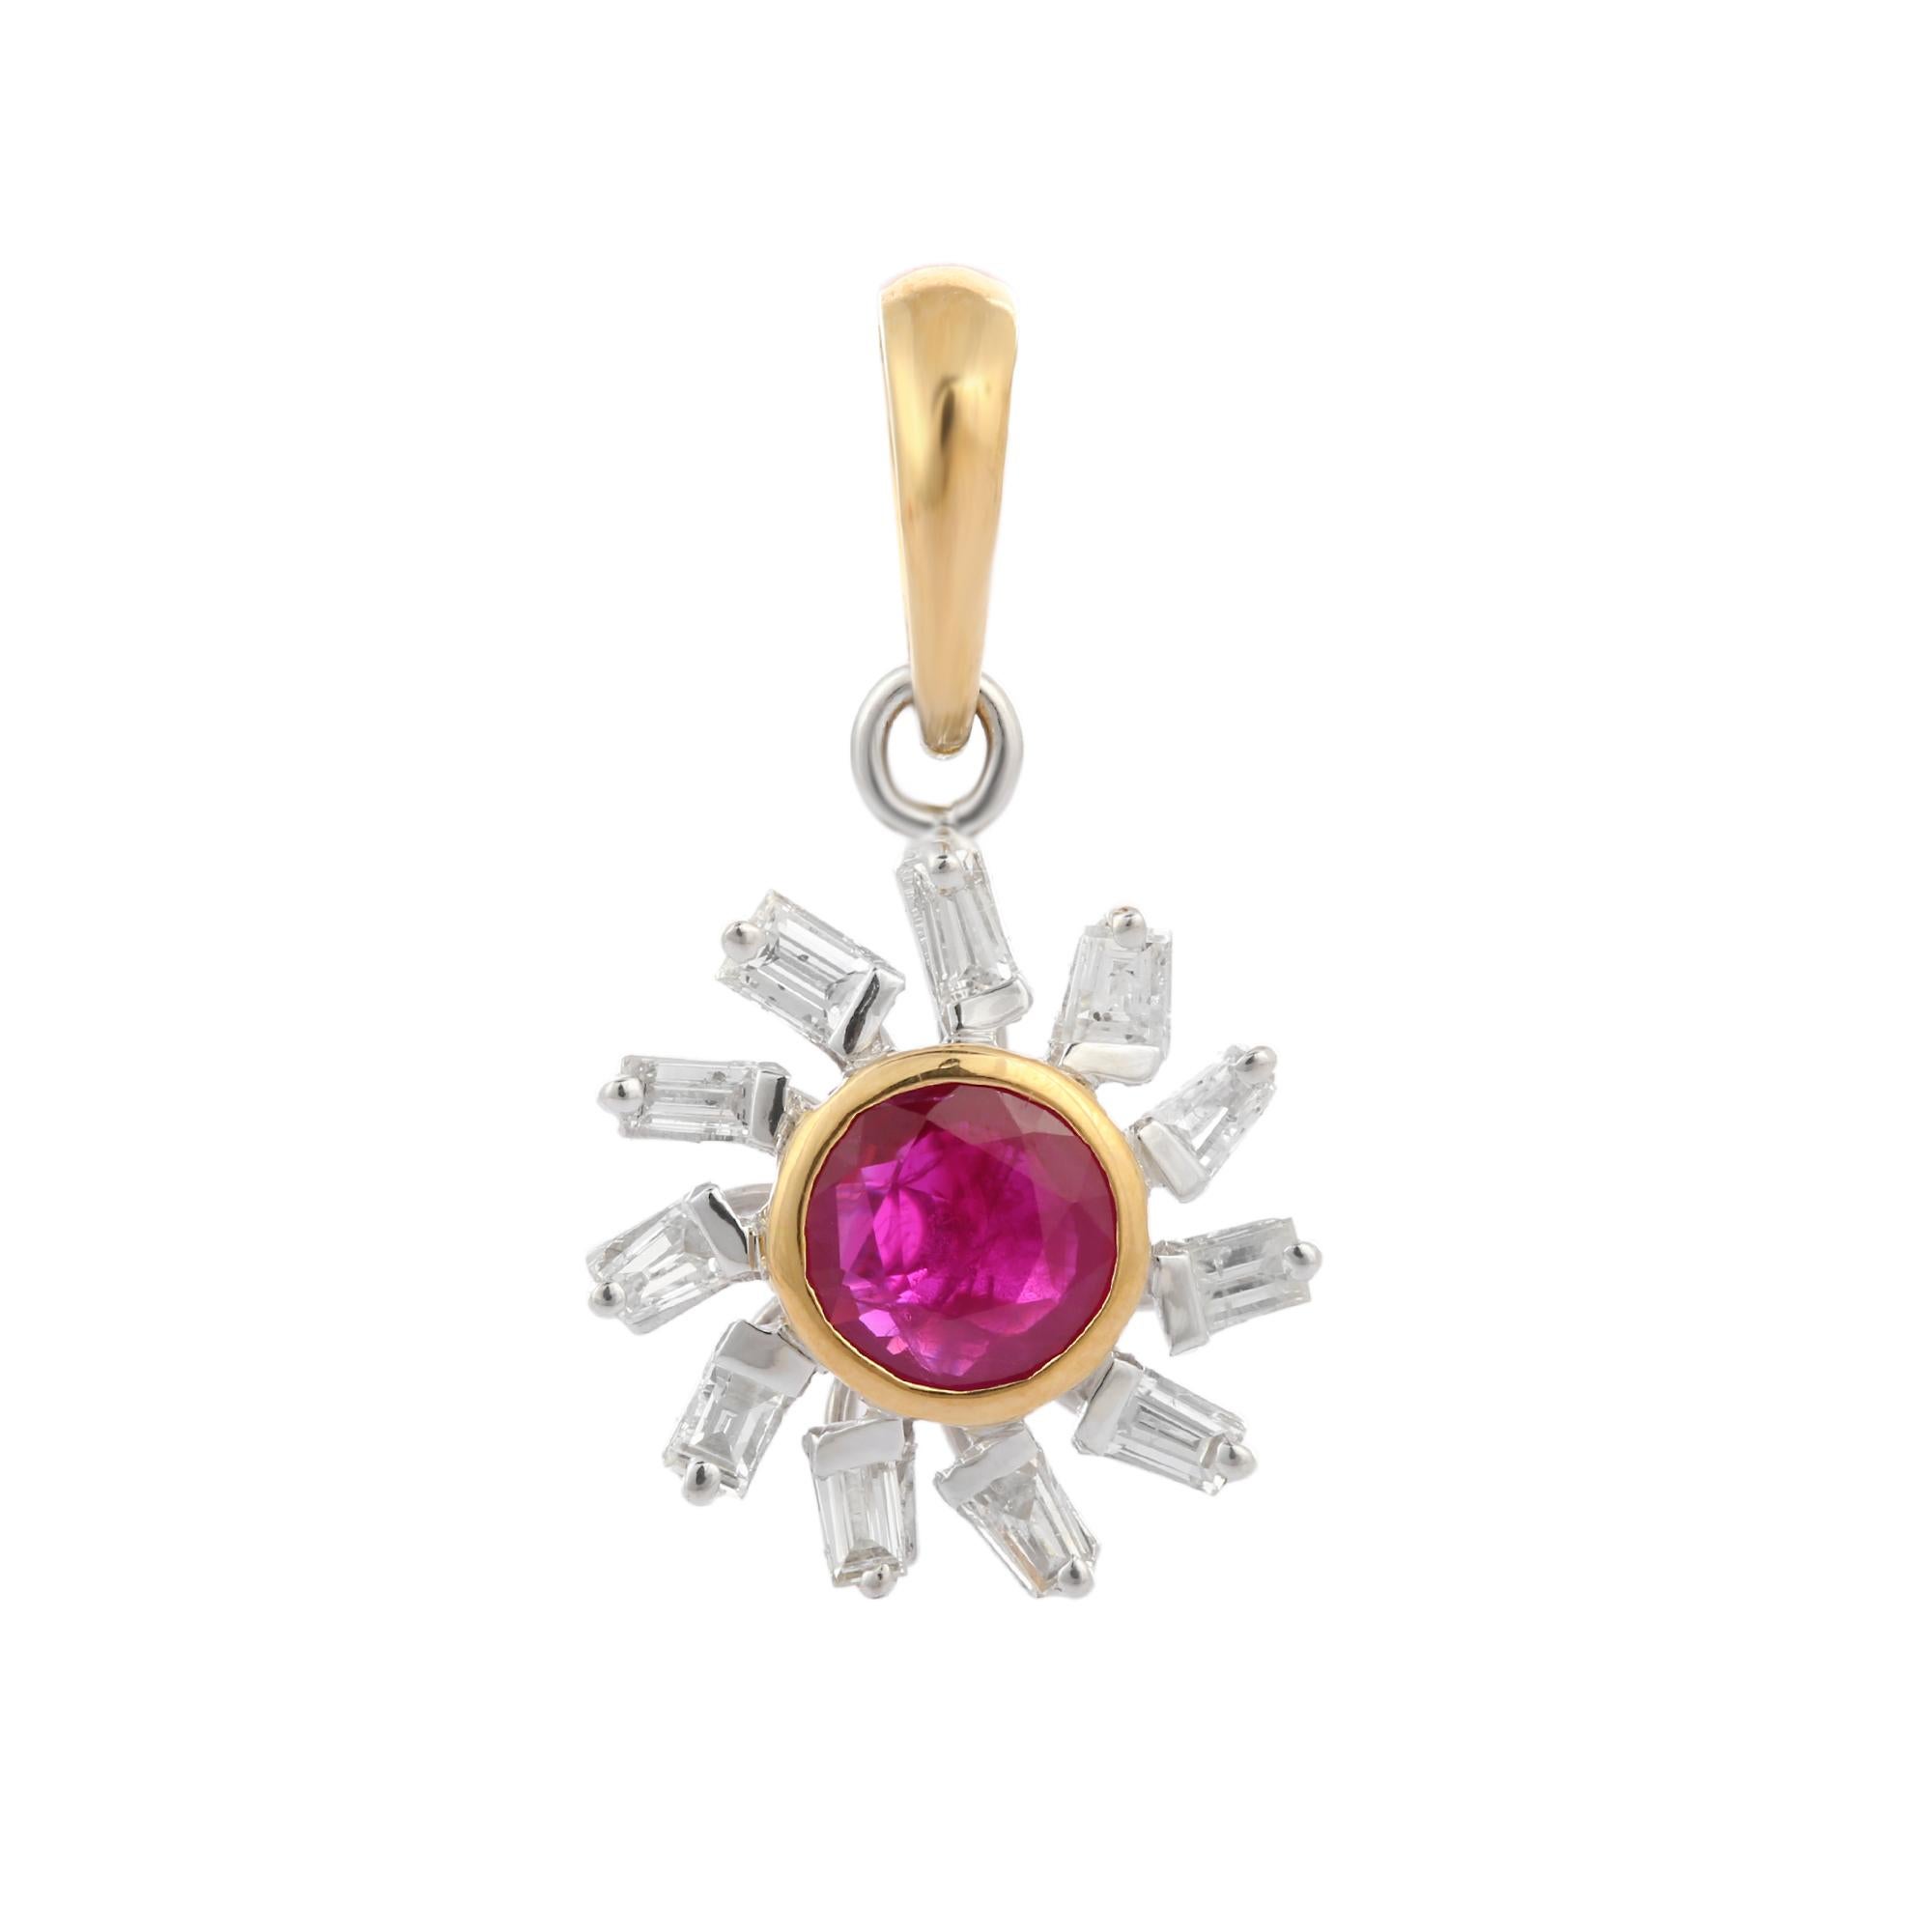 Natural ruby and diamond pendant in 14K Gold. It has a round cut ruby with diamonds that completes your look with a decent touch. Pendants are used to wear or gifted to represent love and promises. It's an attractive jewelry piece that goes with